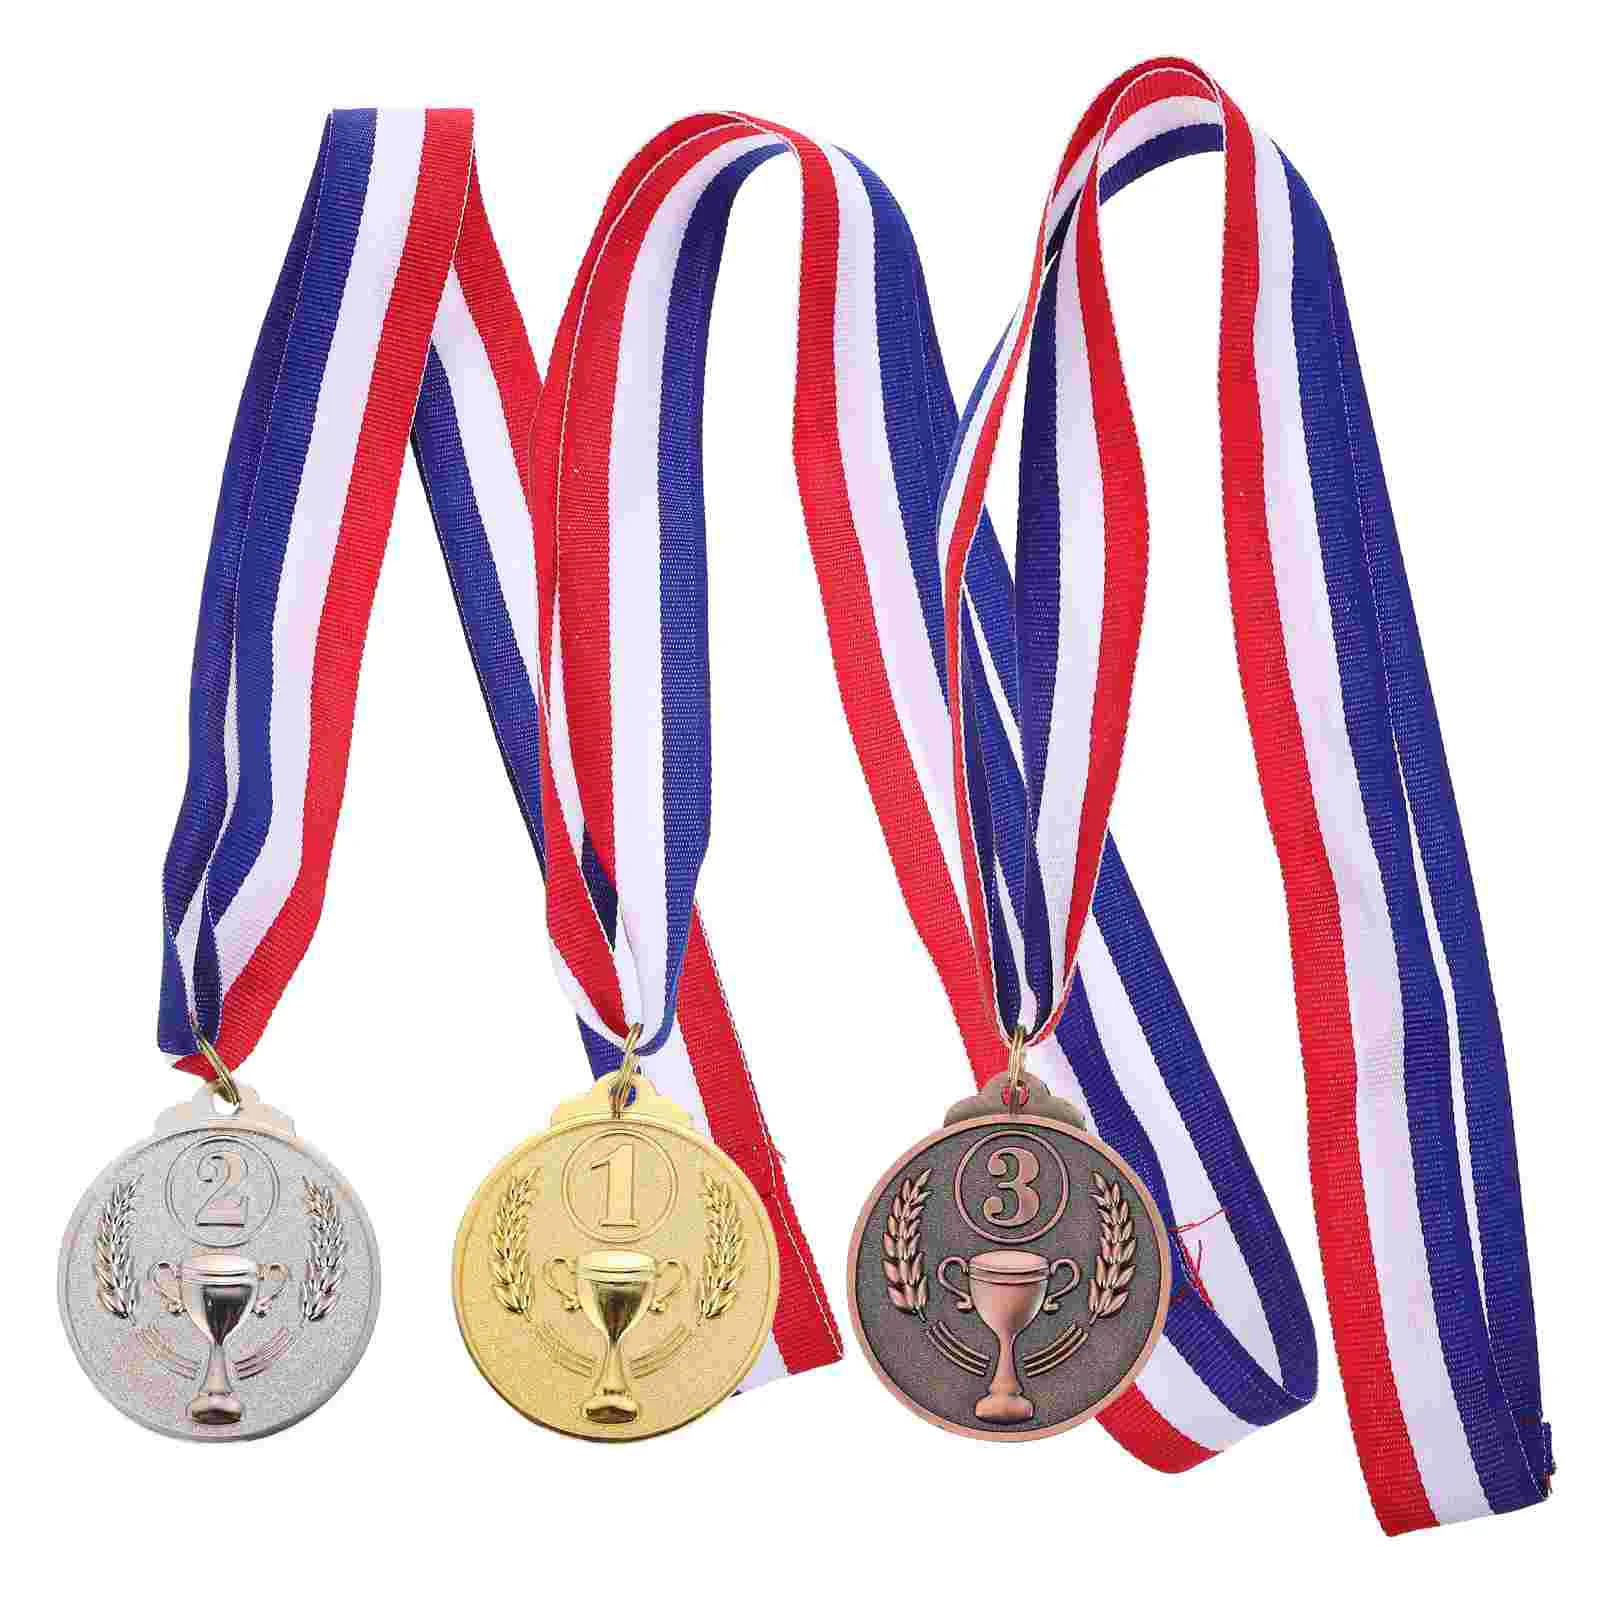 

Award Ribbons Medal Medals Gold Silver Bronze Medals Golden Medal Award Style Medal Meeting Medal For Sports Academics